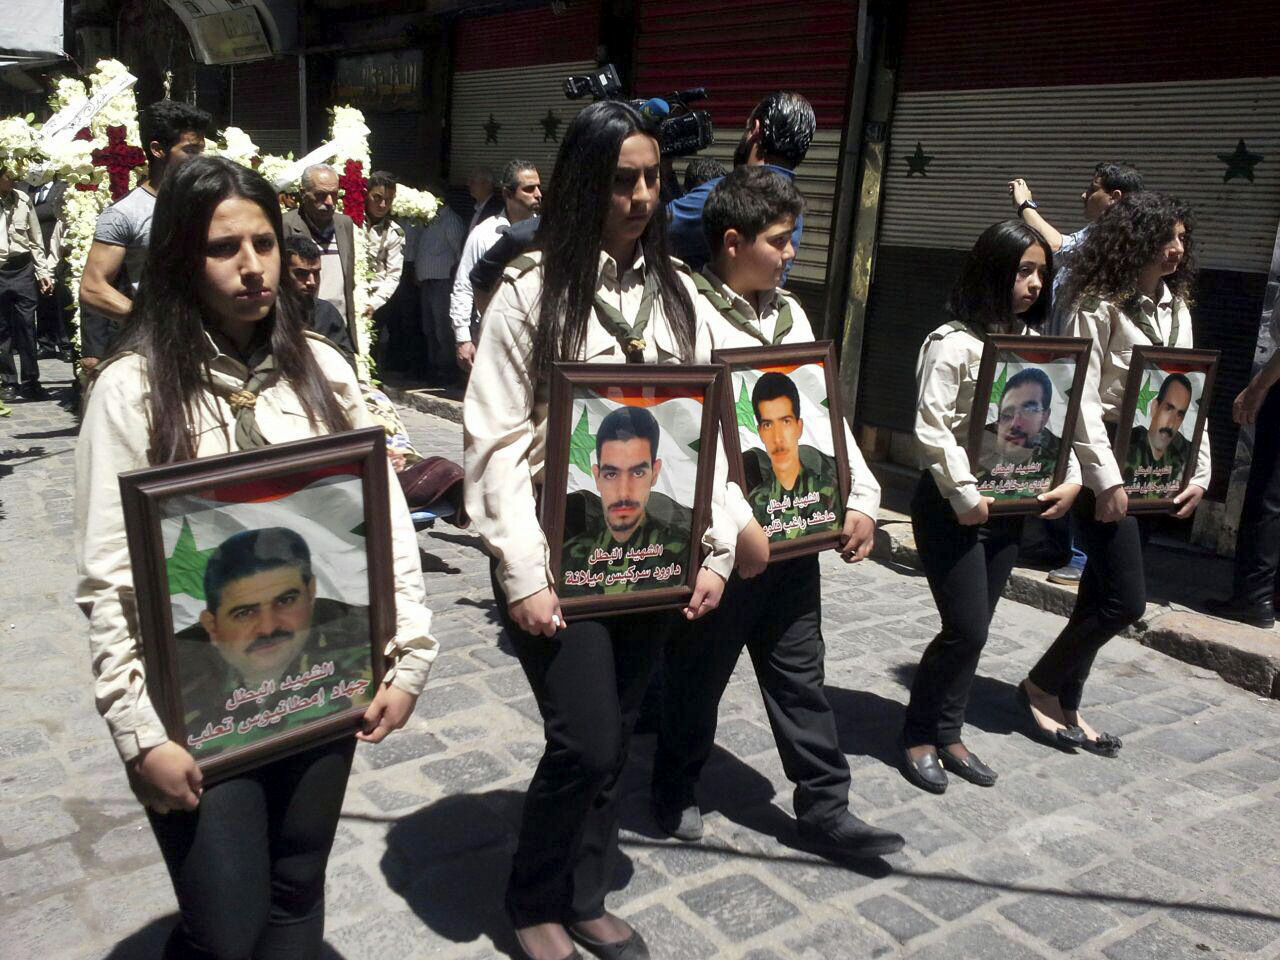 Girls carry the pictures of five Syrian Christian men who were kidnapped four years ago by rebel groups during their funeral prayers in Bab Touma, a predominantly Christian quarter of the Syrian capital Damascus, Syria, April 25, 2017. (SANA via AP)